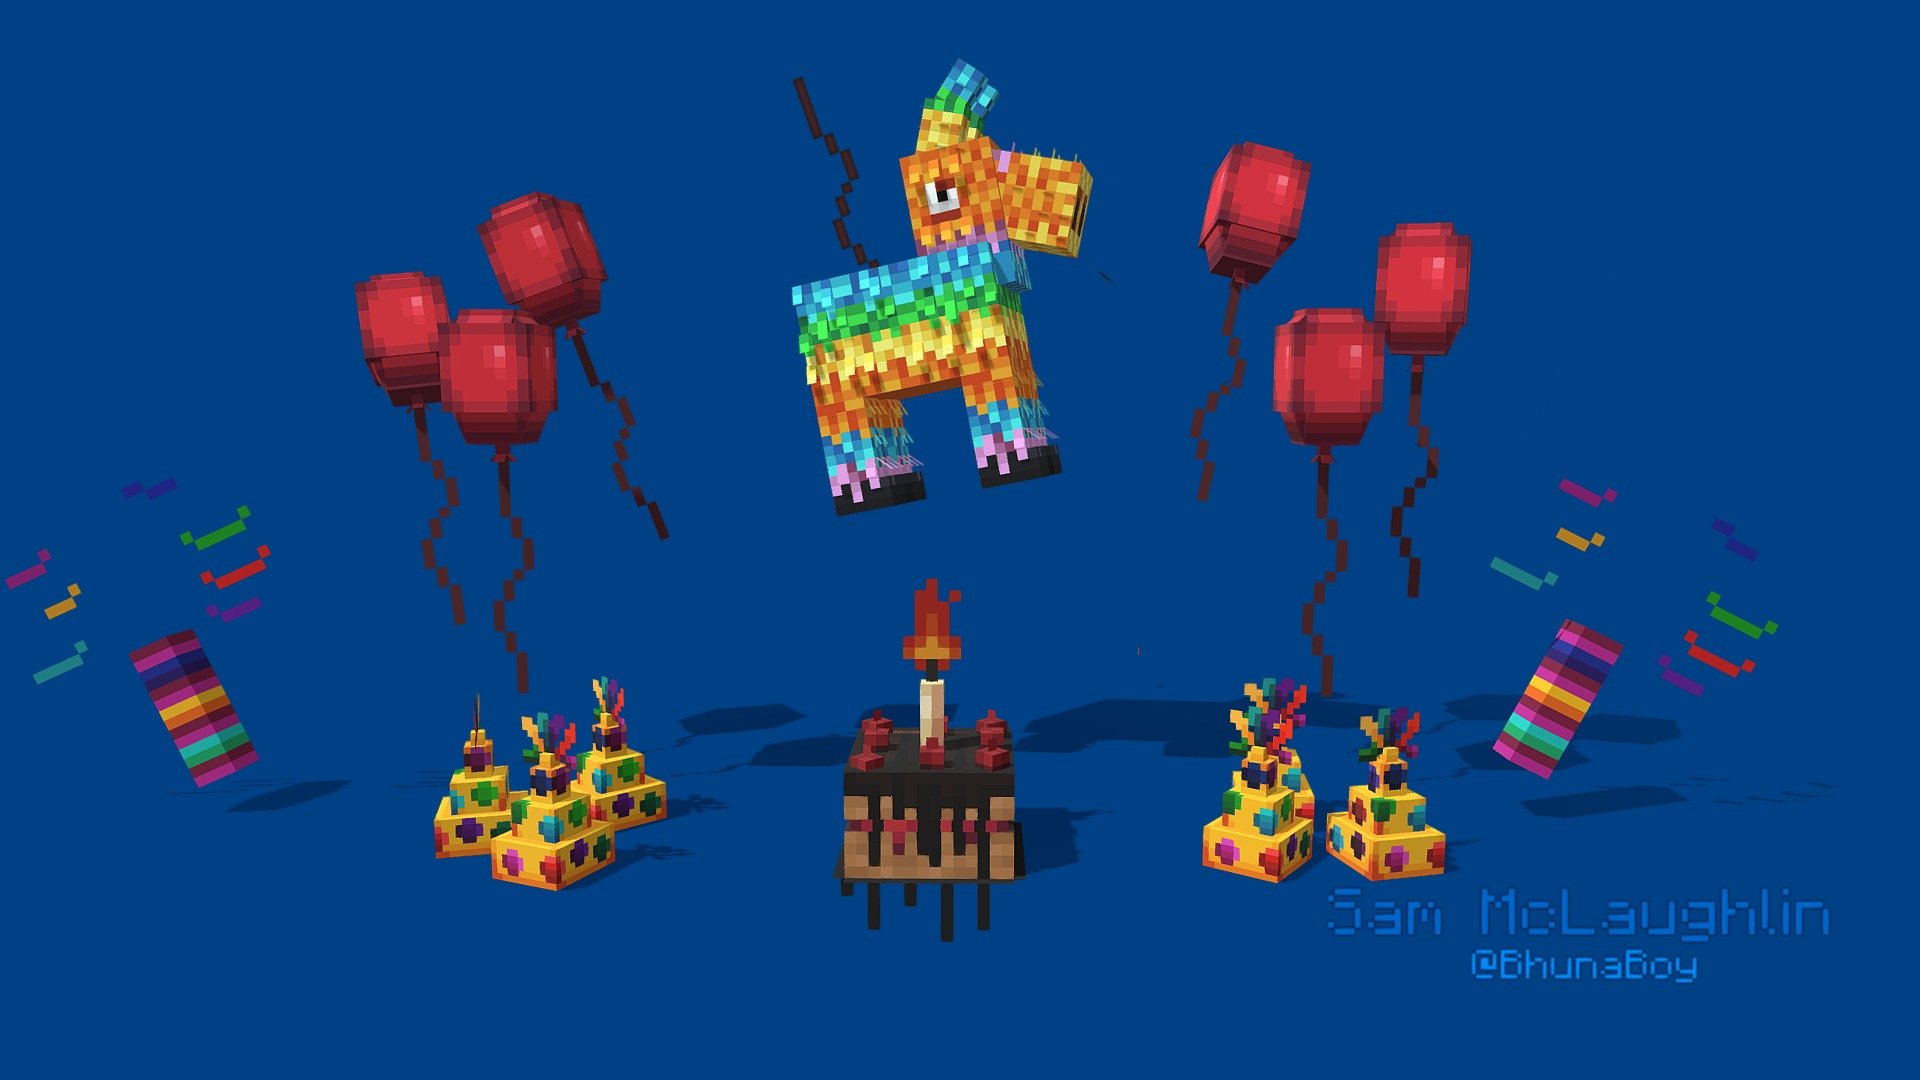 -Pinata
-Sponge and chocolate cake
-Red Balloon
-Party Popper
-Party Hat


About the Project



Modelled and Textured by Sam McLaughlin (Bhuna)

Produced for  **config ** 

Made in Blockbench




Contact Me
Available for Marketplace or Minecraft work





Follow me on twitter




Contact me on Discord: Sam McLaughlin#4095


 - Party Set - 3D model by Sam McLaughlin (@BhunaBoy) 3d model